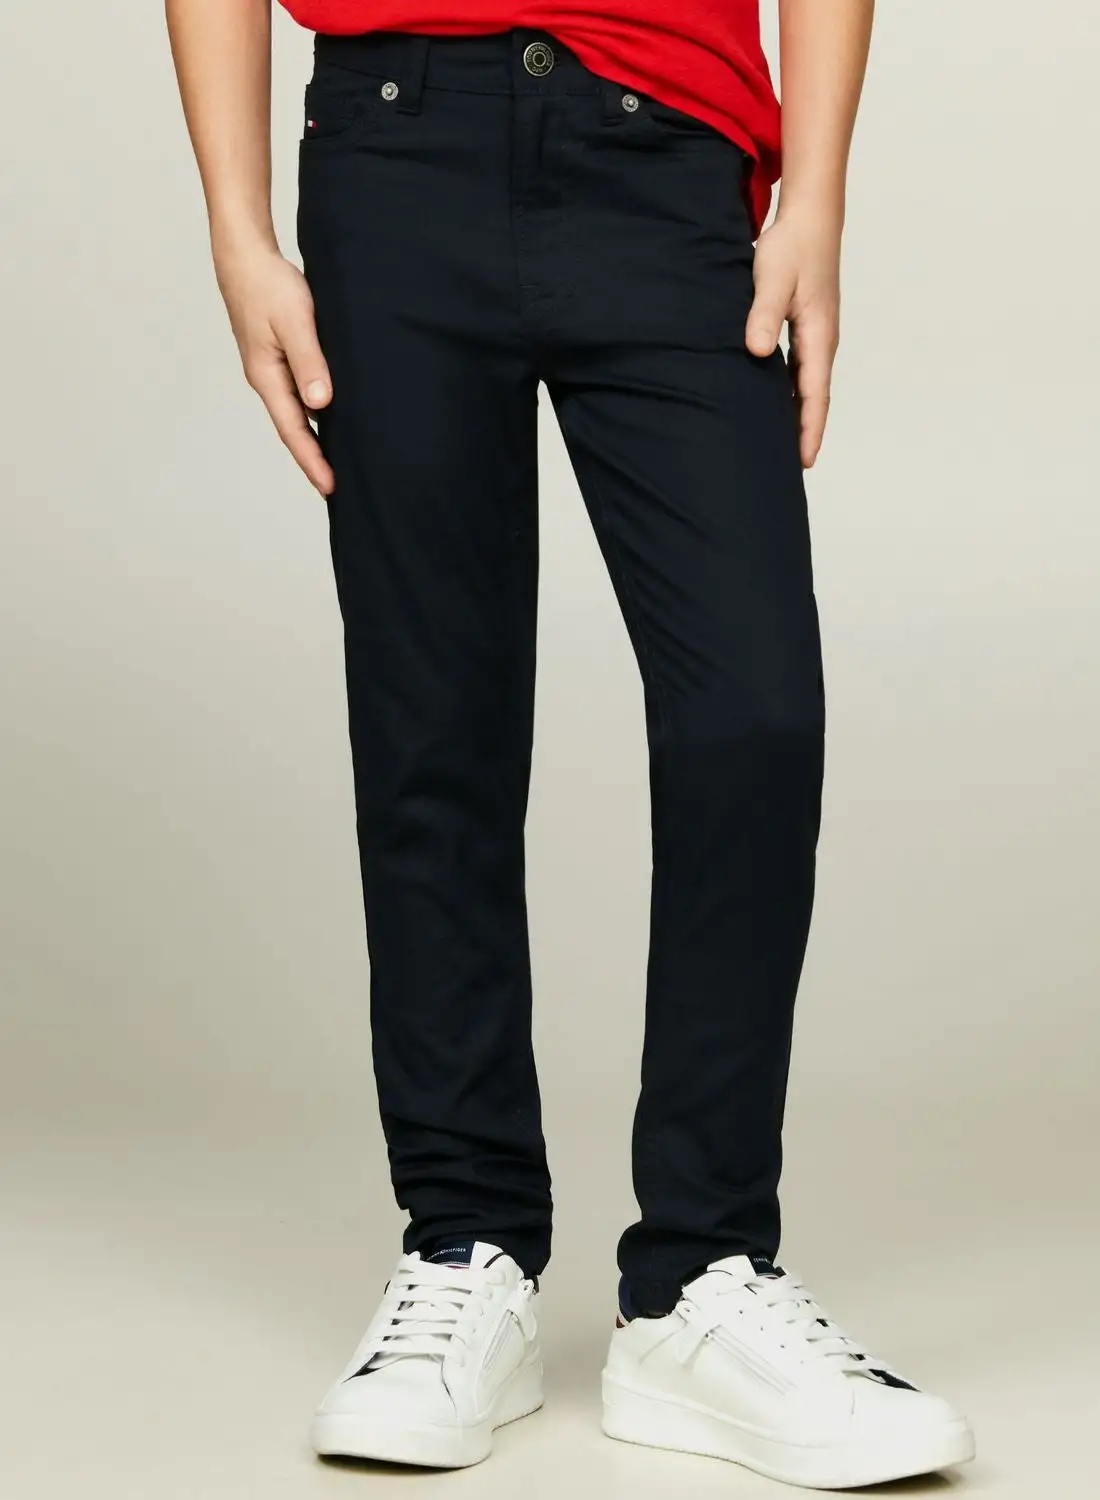 TOMMY HILFIGER Youth Essential Pants